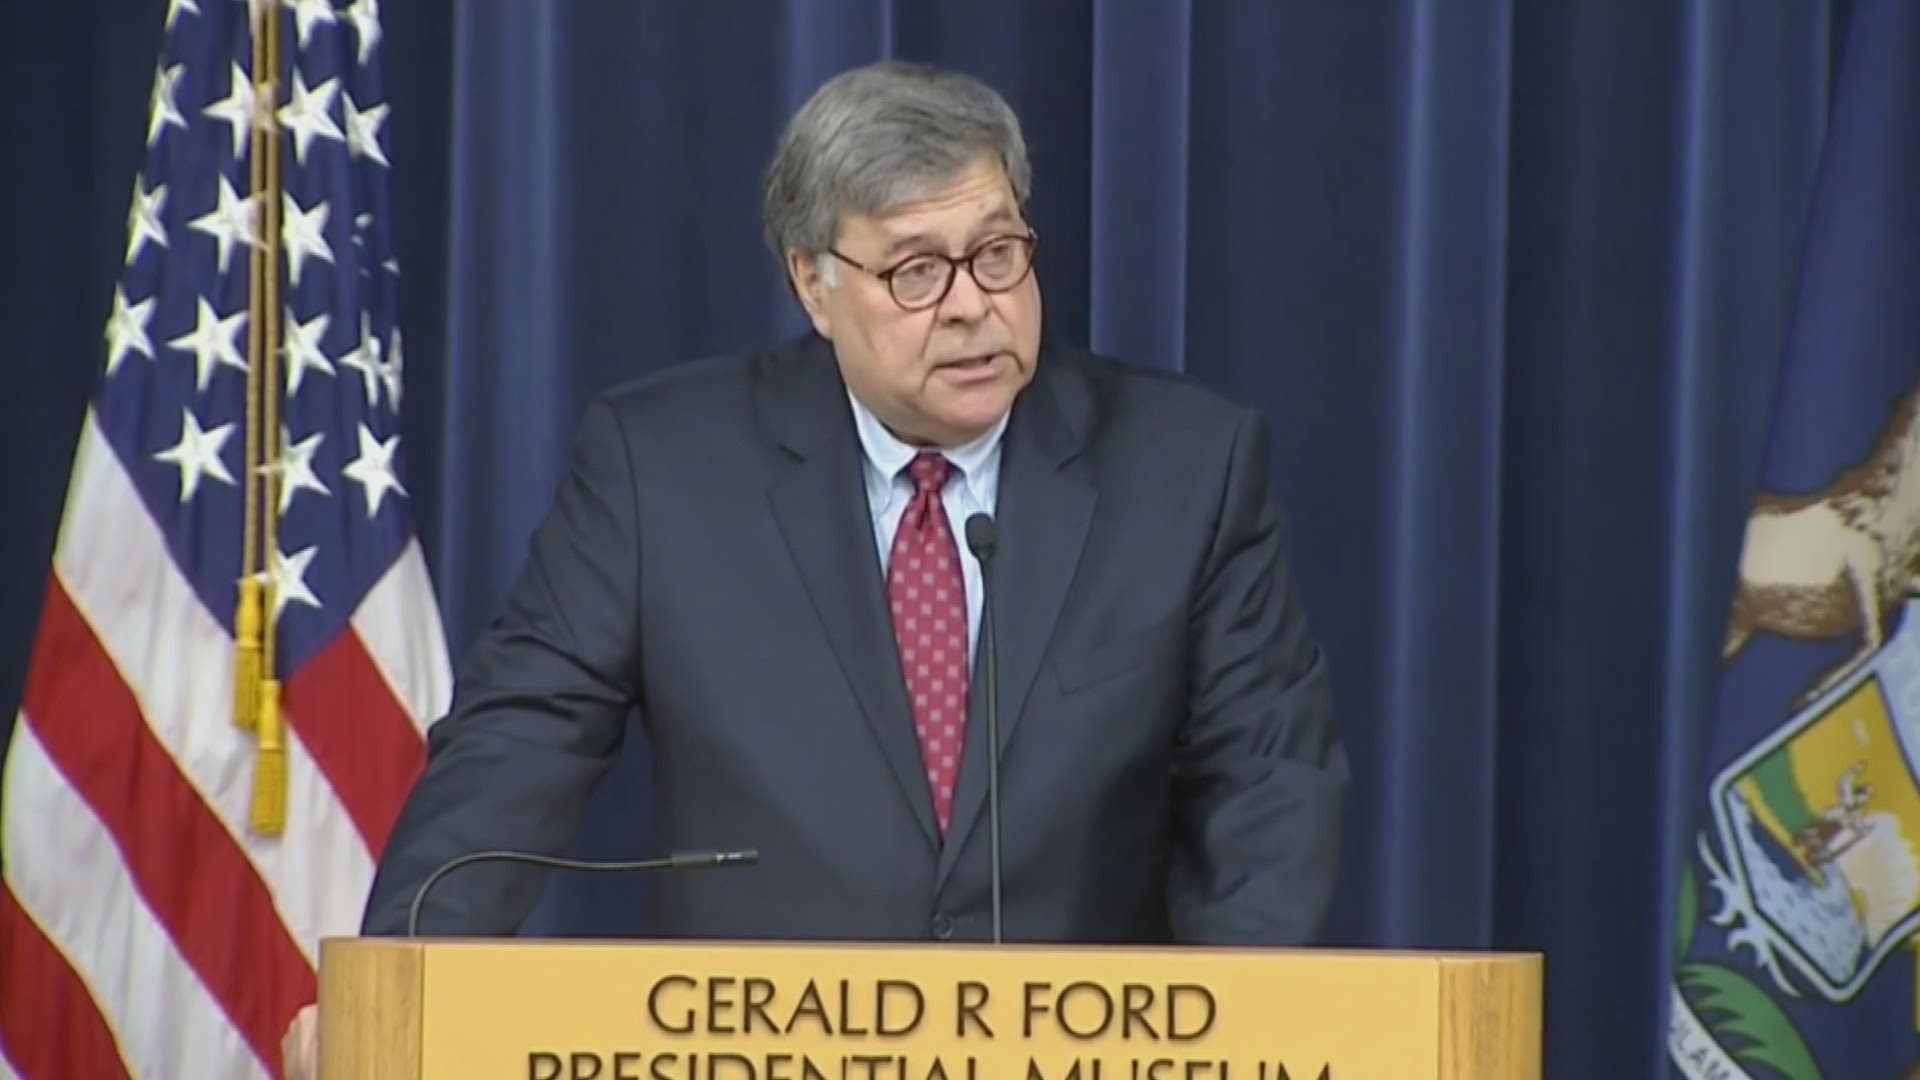 Barr spoke at the Gerald R. Ford Presidential Museum in Grand Rapids Thursday morning.